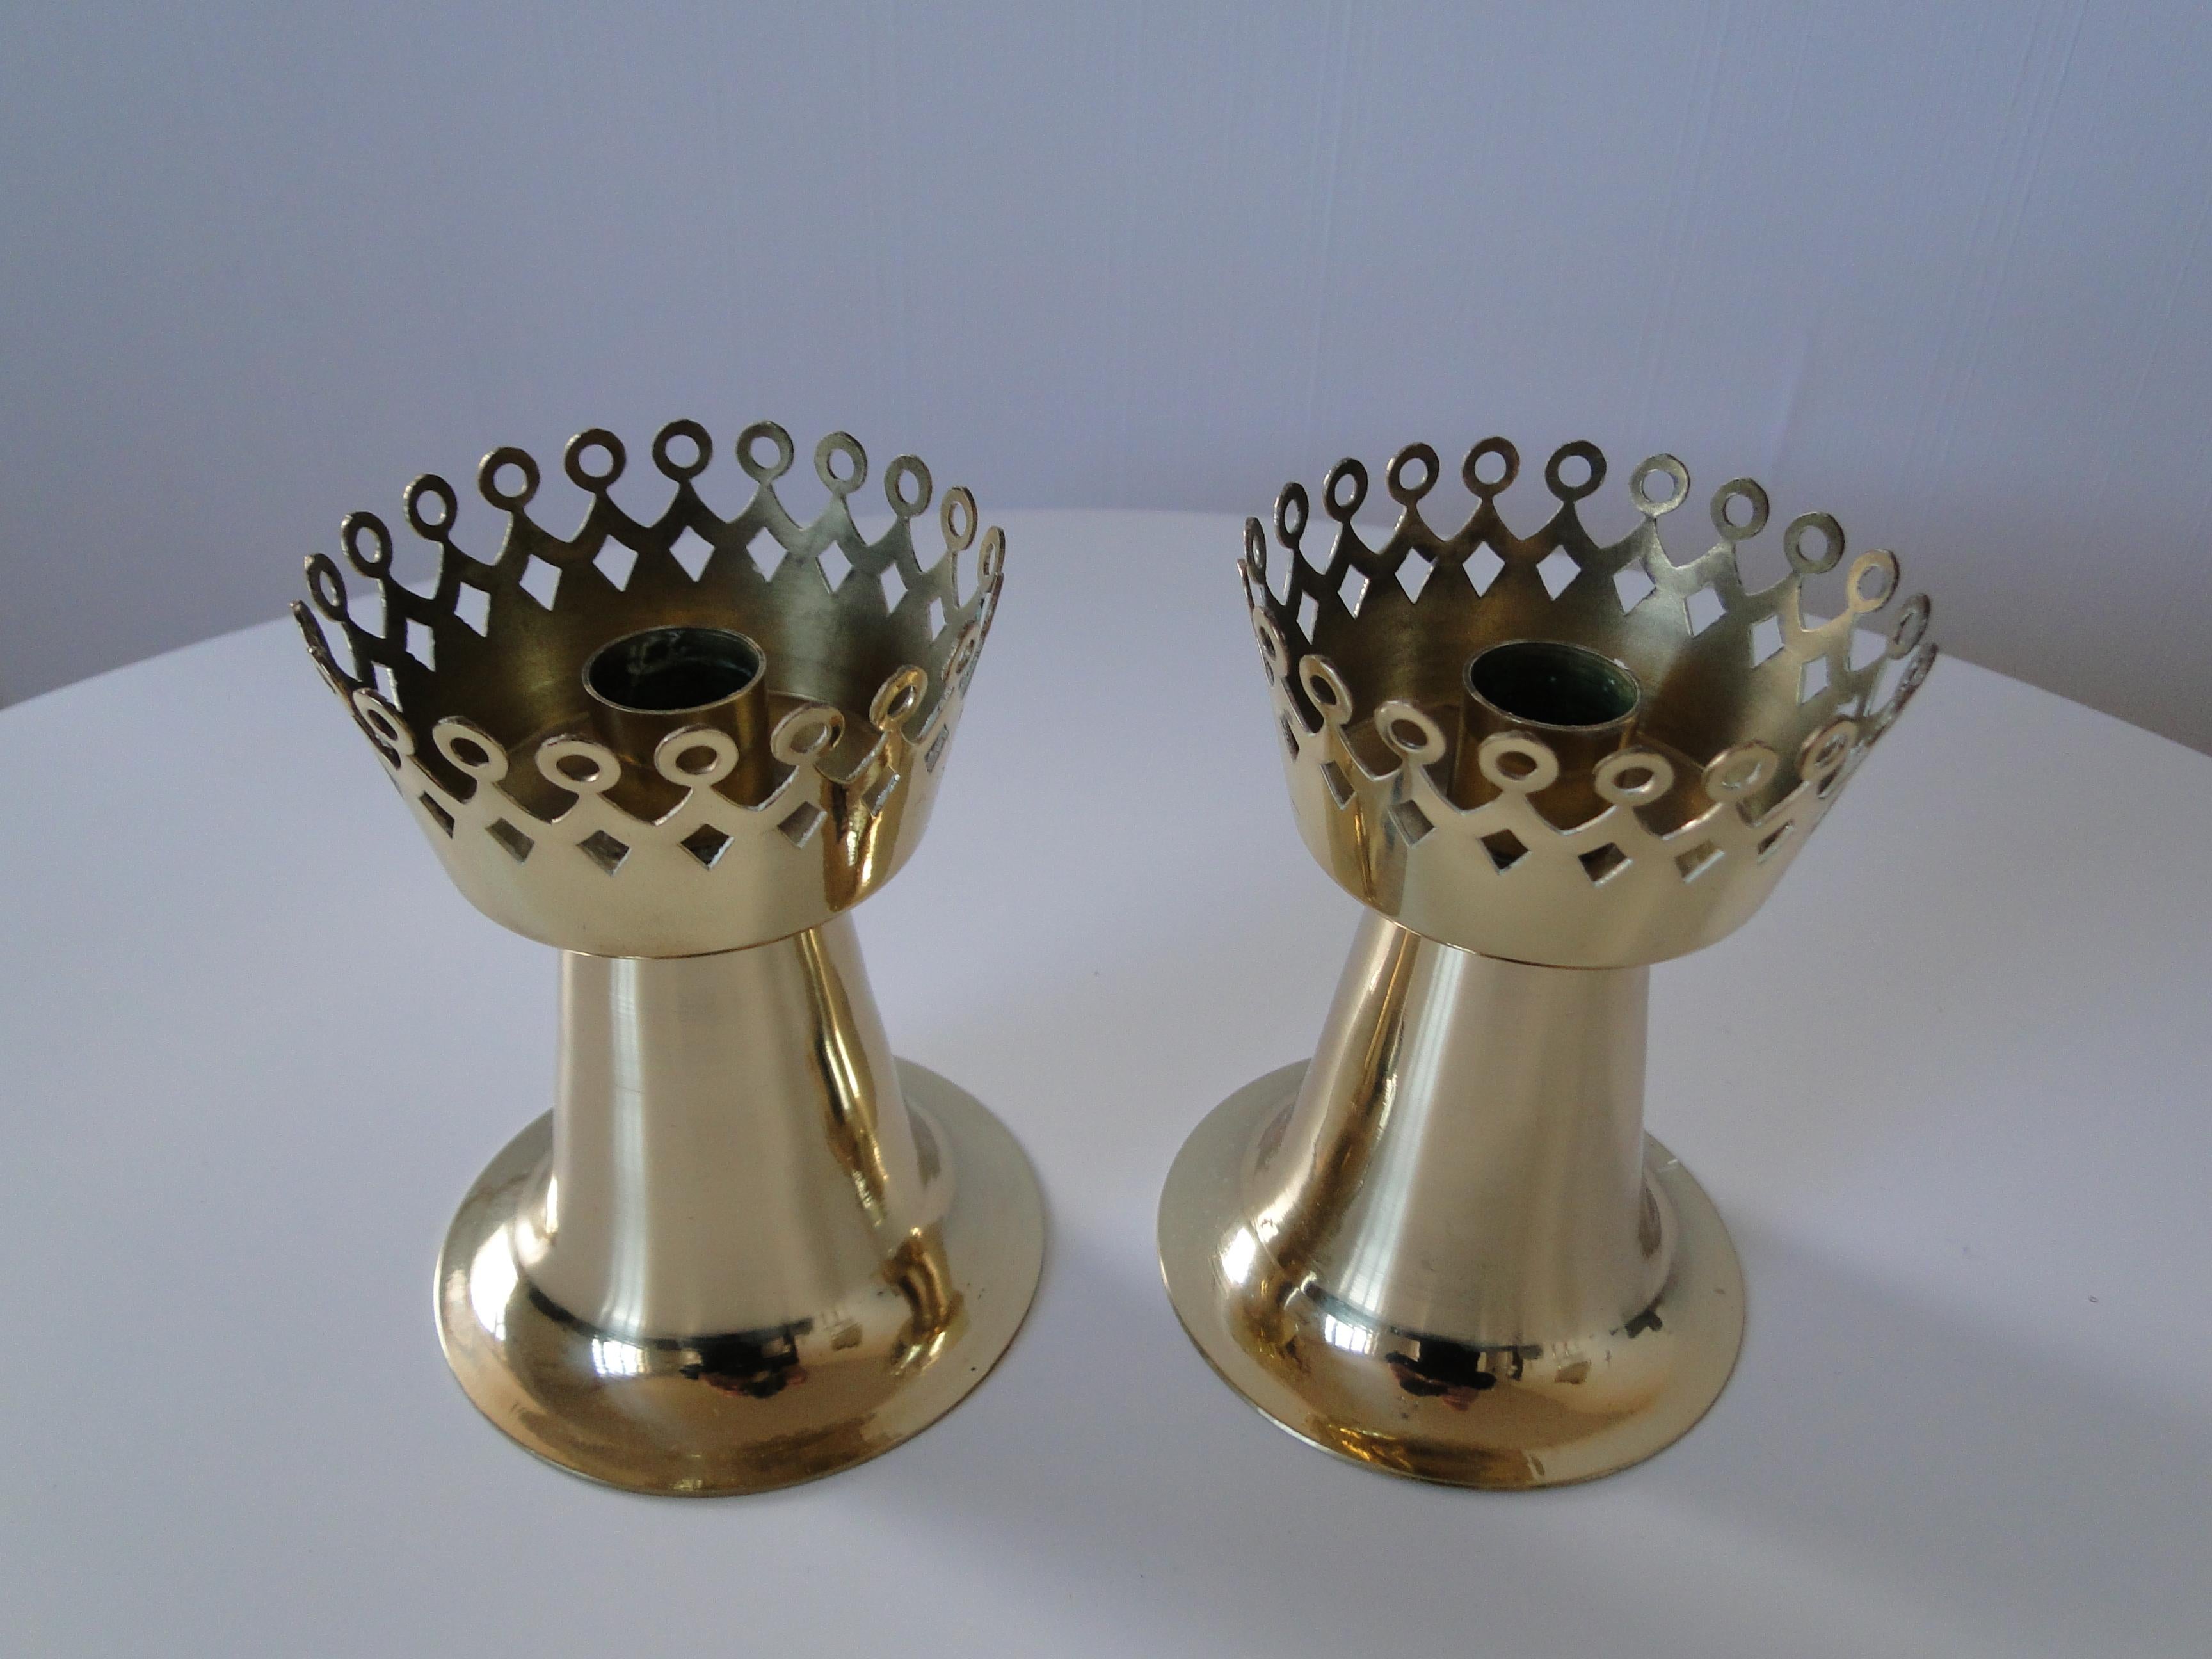 Rare Set of 2 model L159  brass candlesticks by Hans Agne Jakobsson for Markaryd, Sweden, 1960s.

Height of the candlesticks: 11 cm
Diameter of the standard candles of 2 cm

Very good condition.

